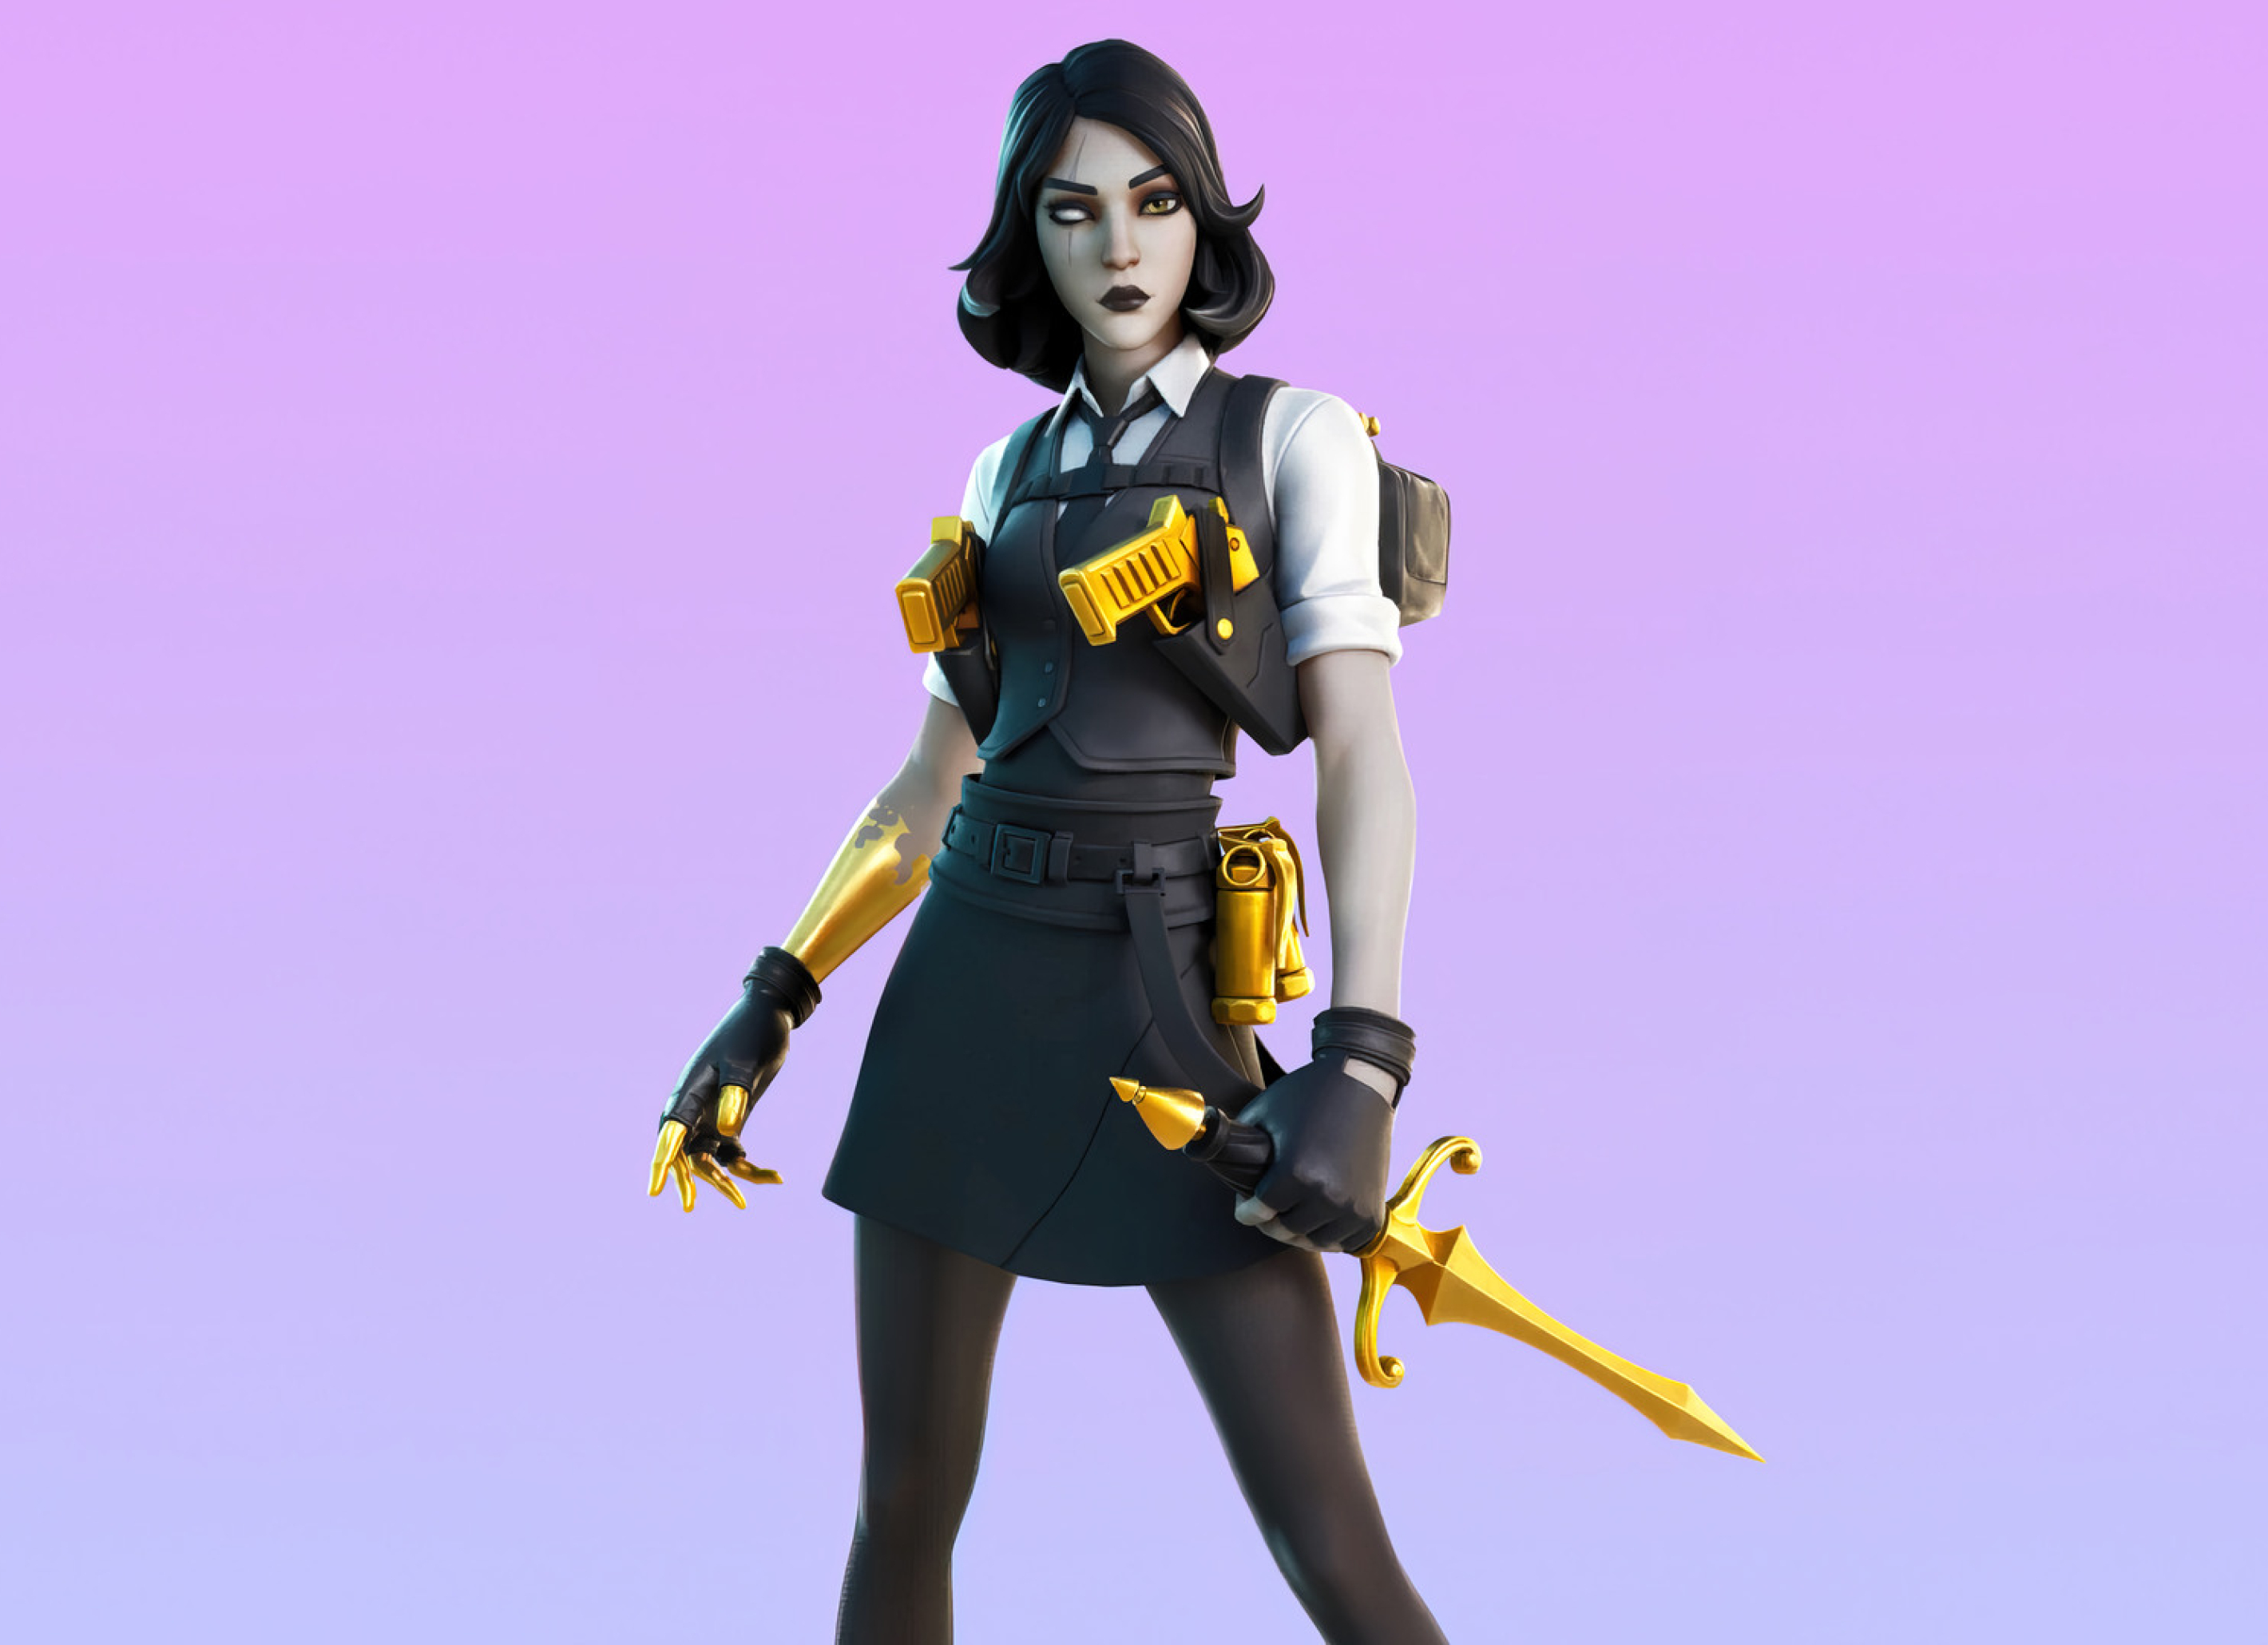 2840x2060 Resolution Fortnite Marigold Outfit Skin 2840x2060 Resolution ...